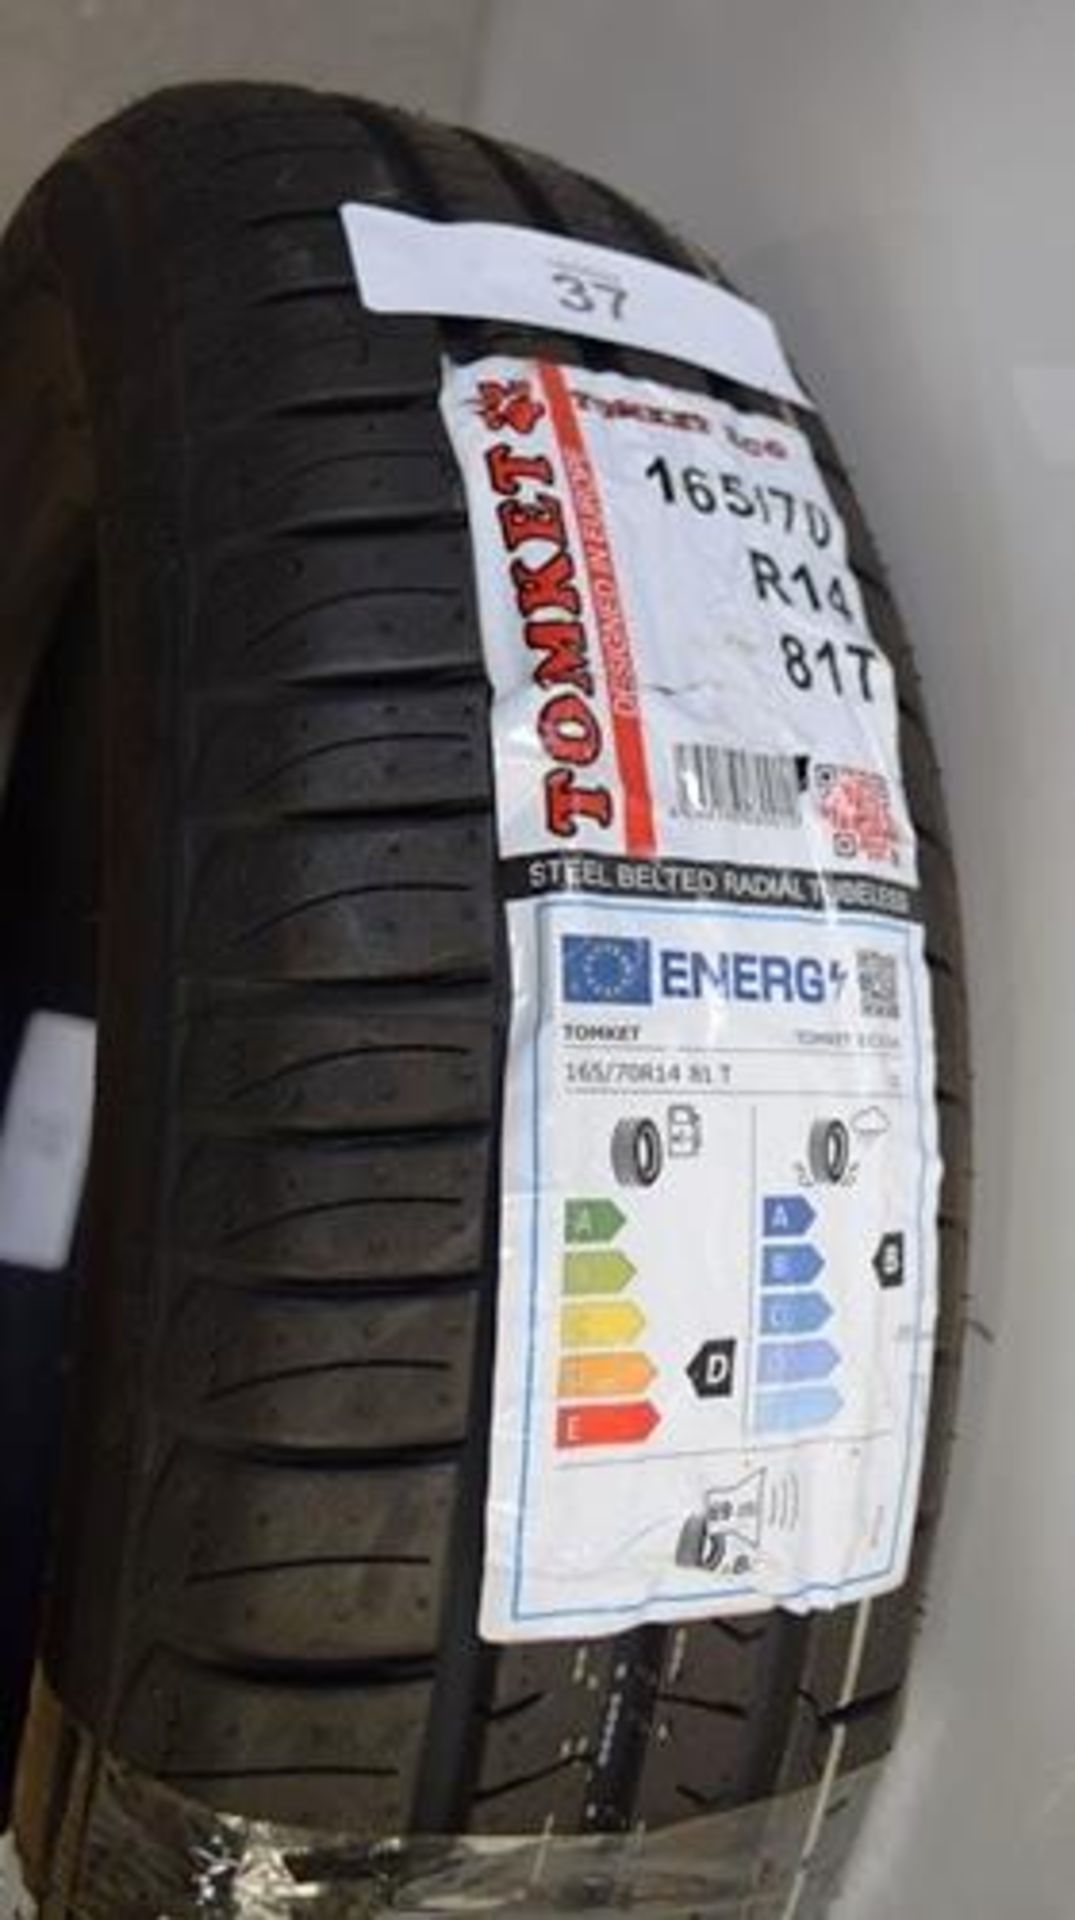 1 x Tomket Eco tyre, size 165/70R14 81T - New with label (GS2)